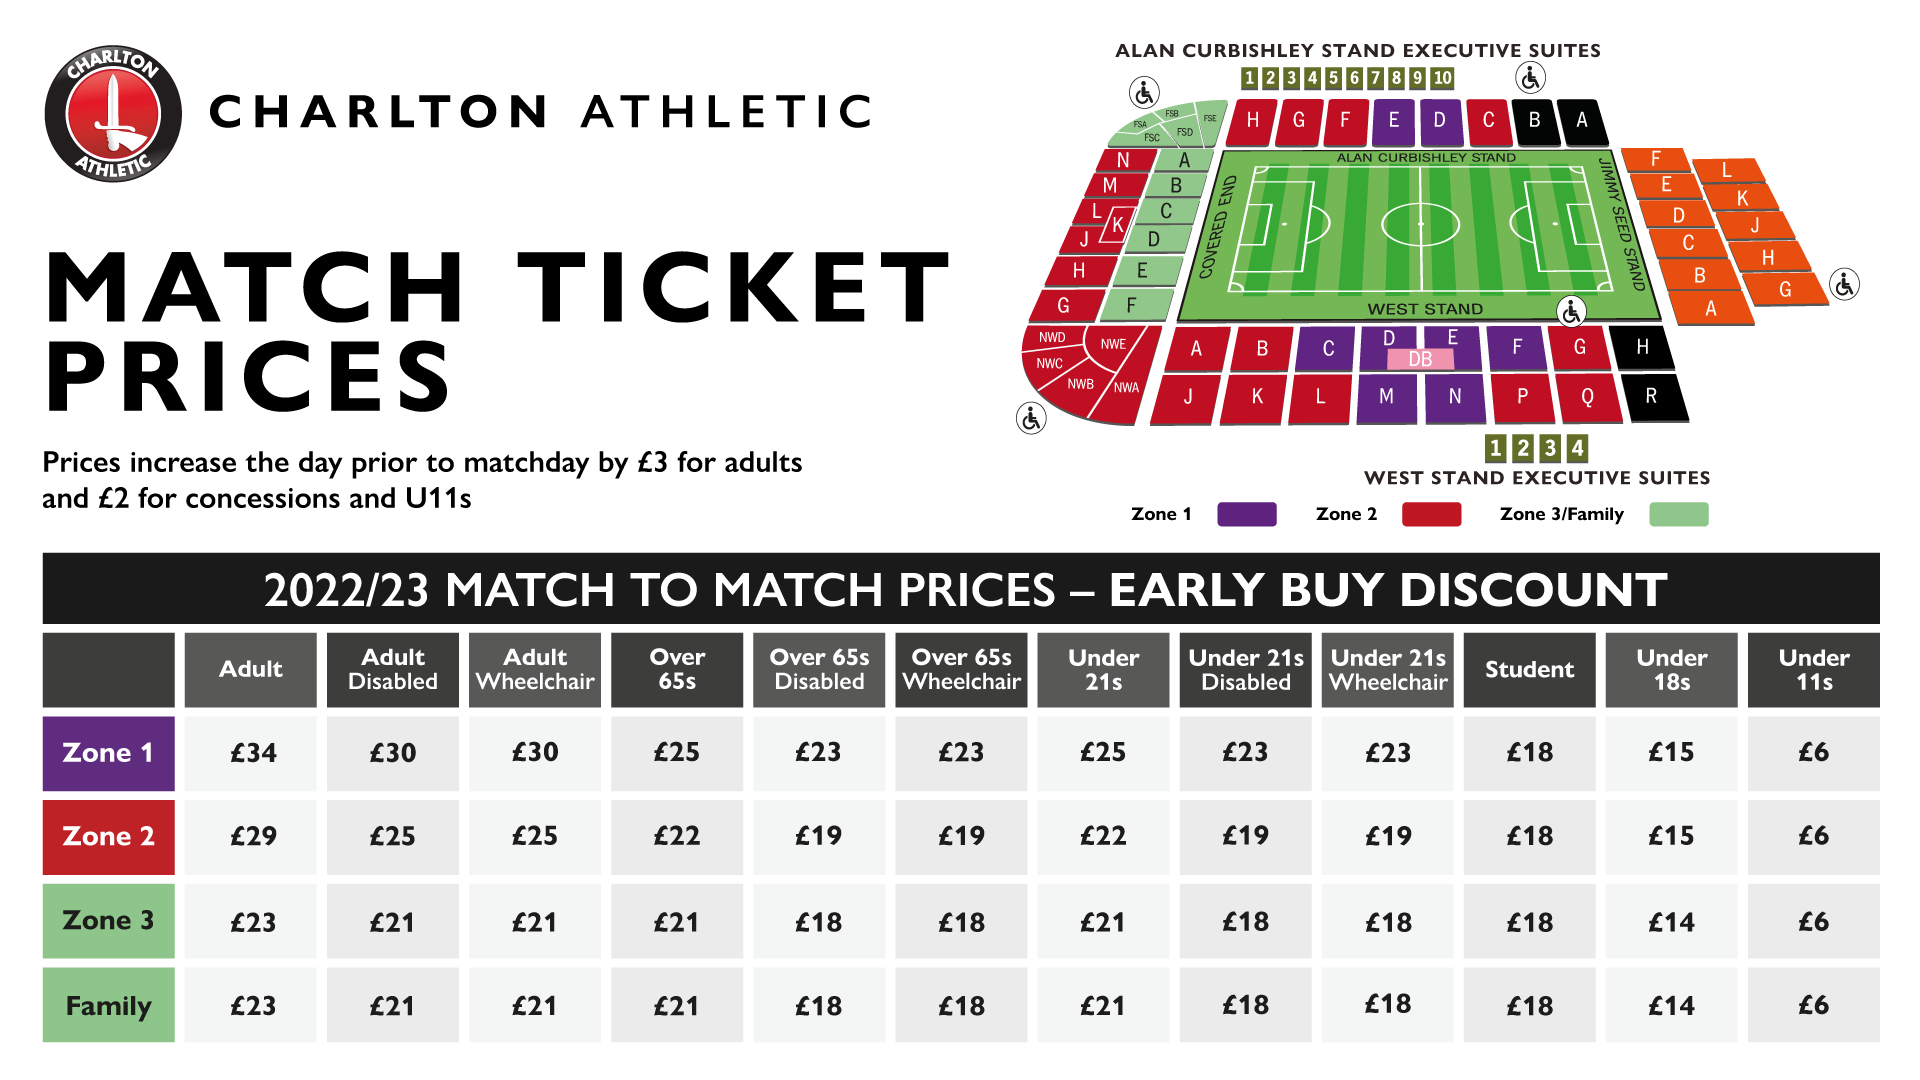 Match ticket prices for the 2022/23 season